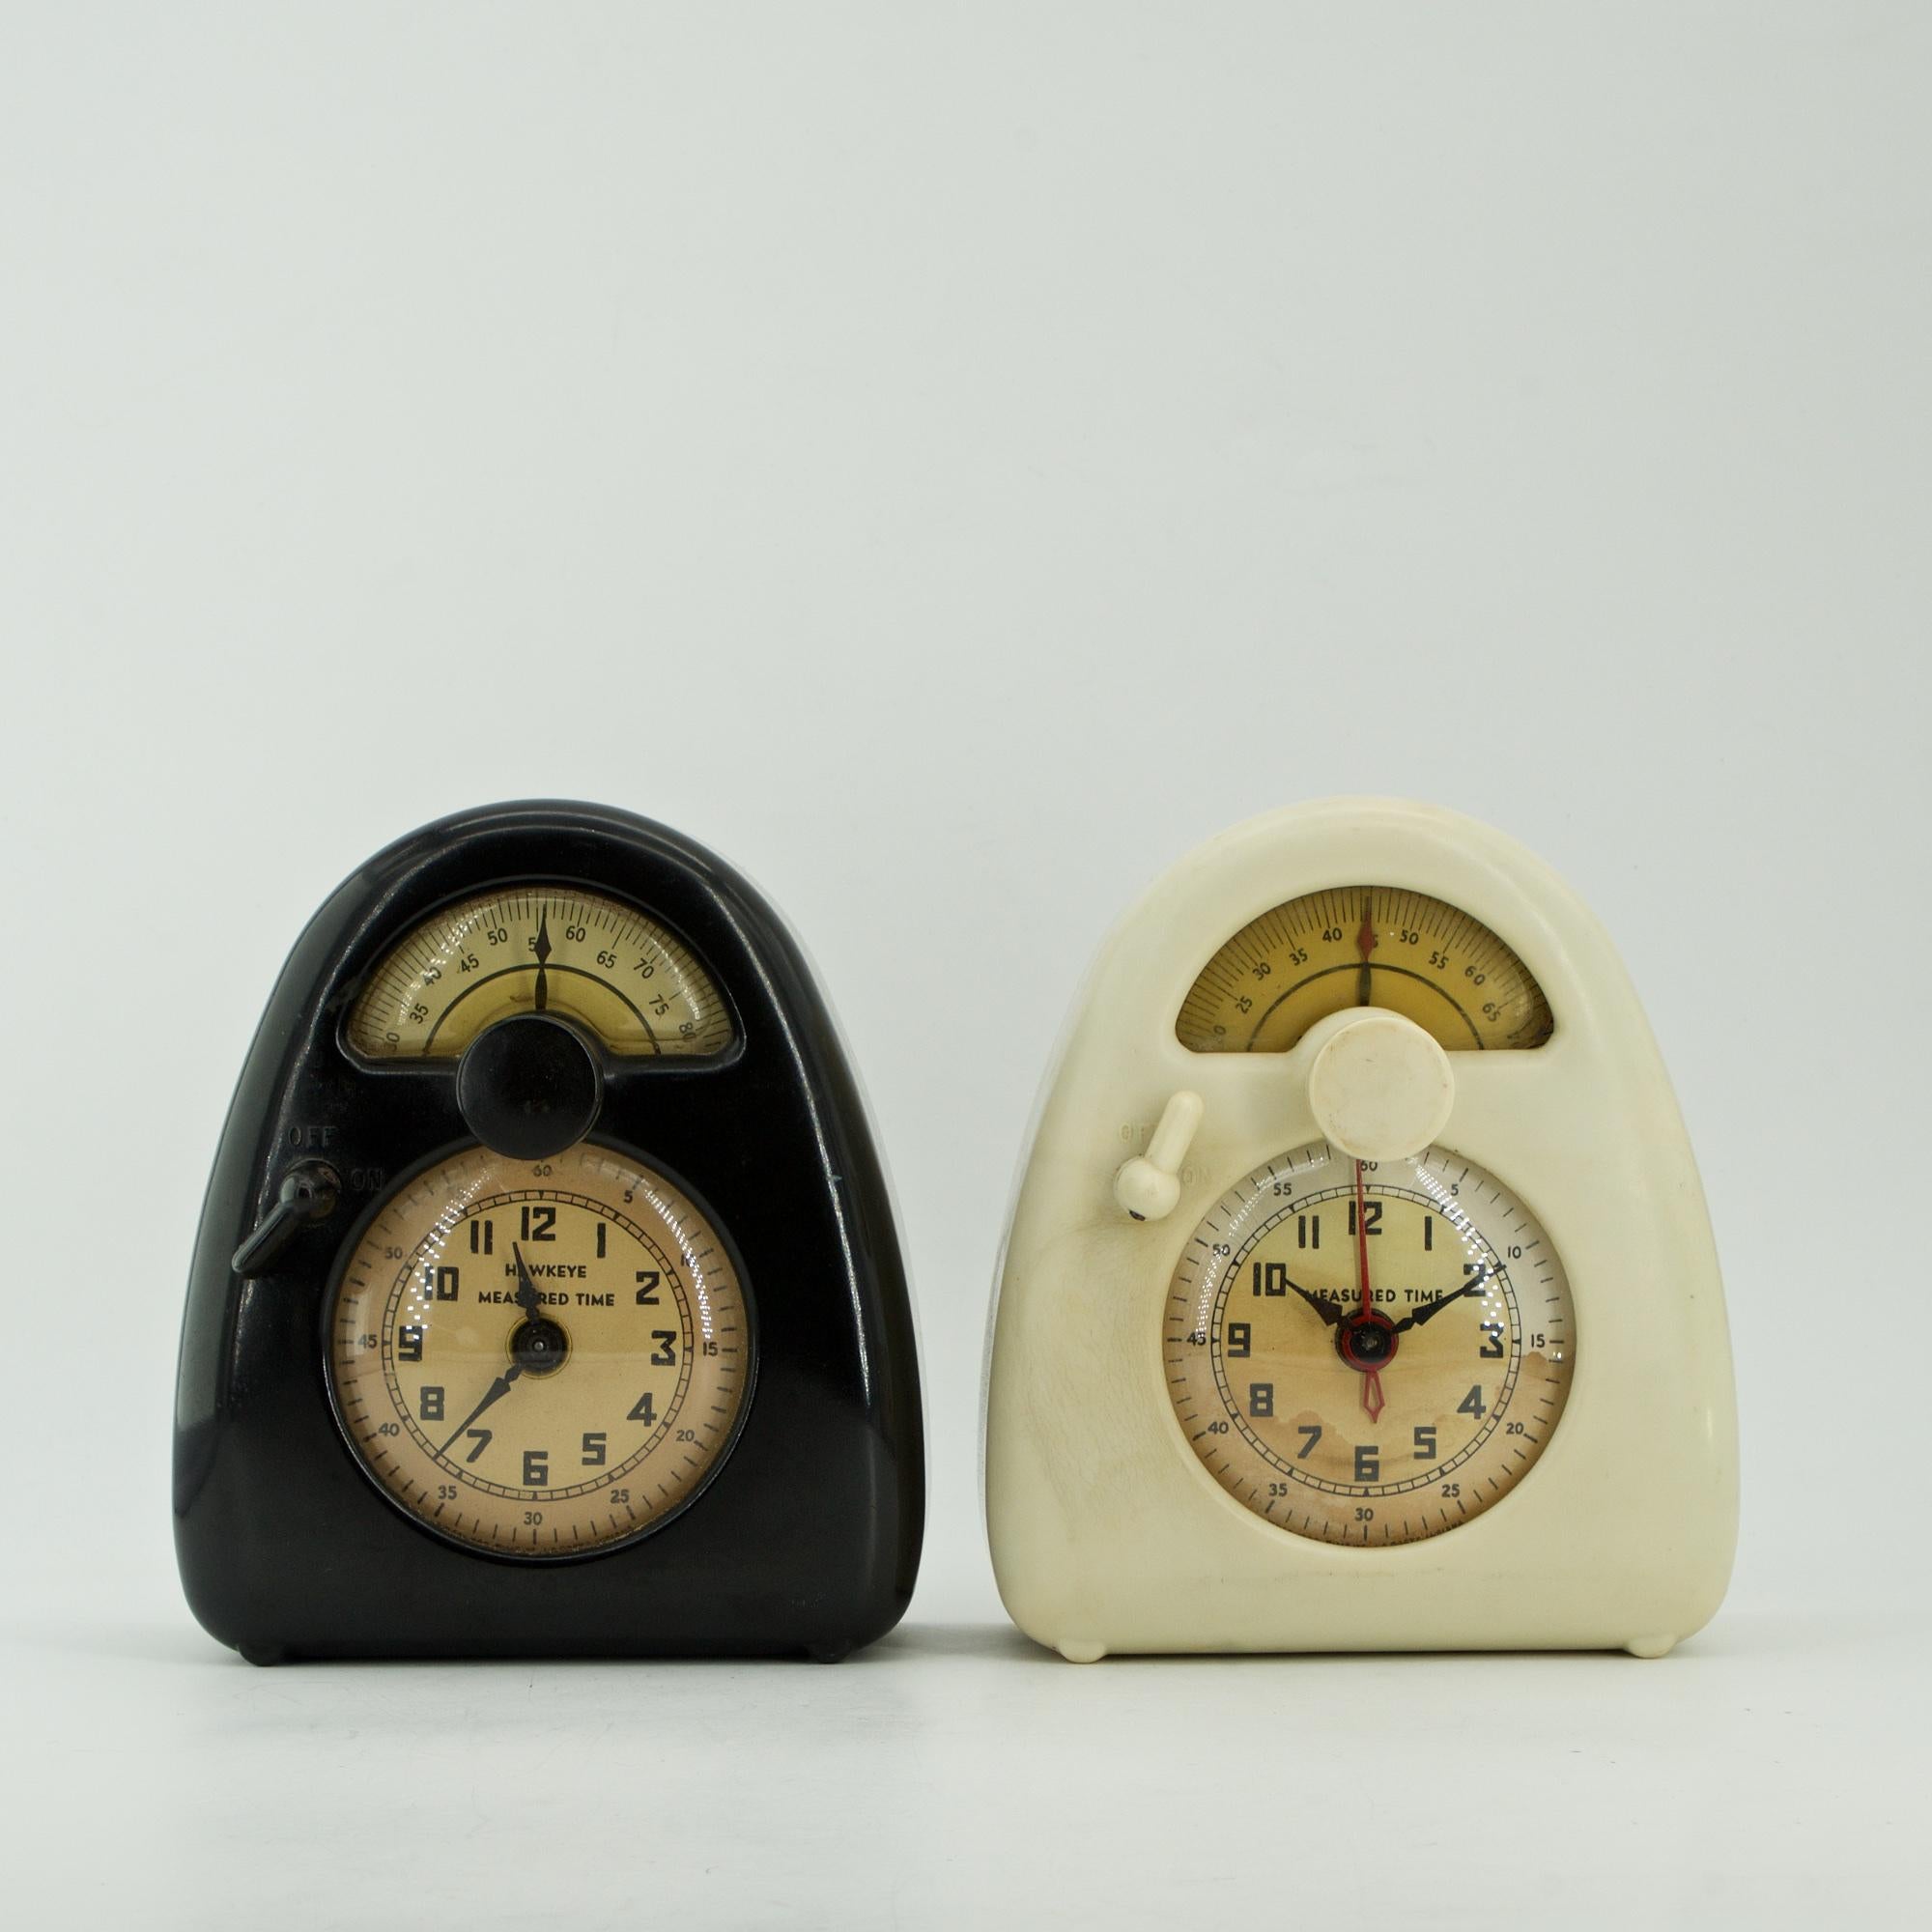 Sale includes both, and both clocks are untested, thus graded DISTRESSED, despite being cosmetically good.